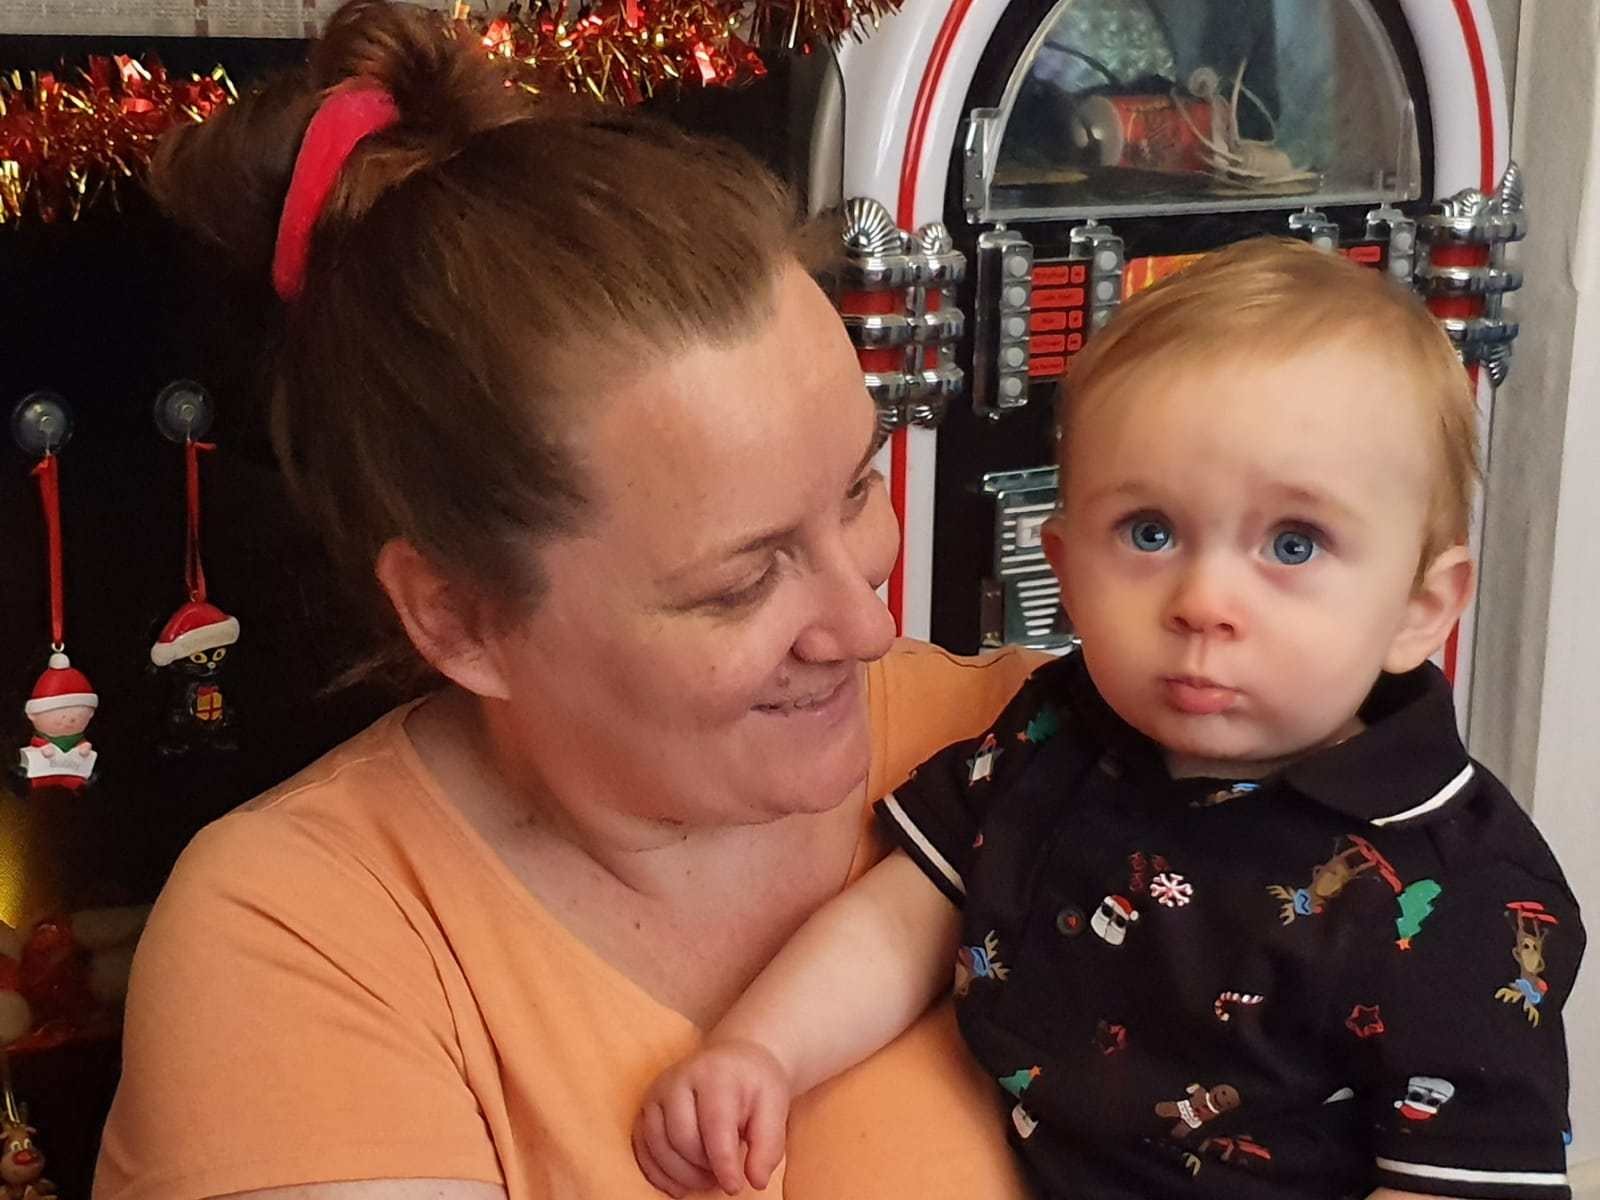 I was heartbroken to learn my baby is deaf – but now I know it won’t hold him back